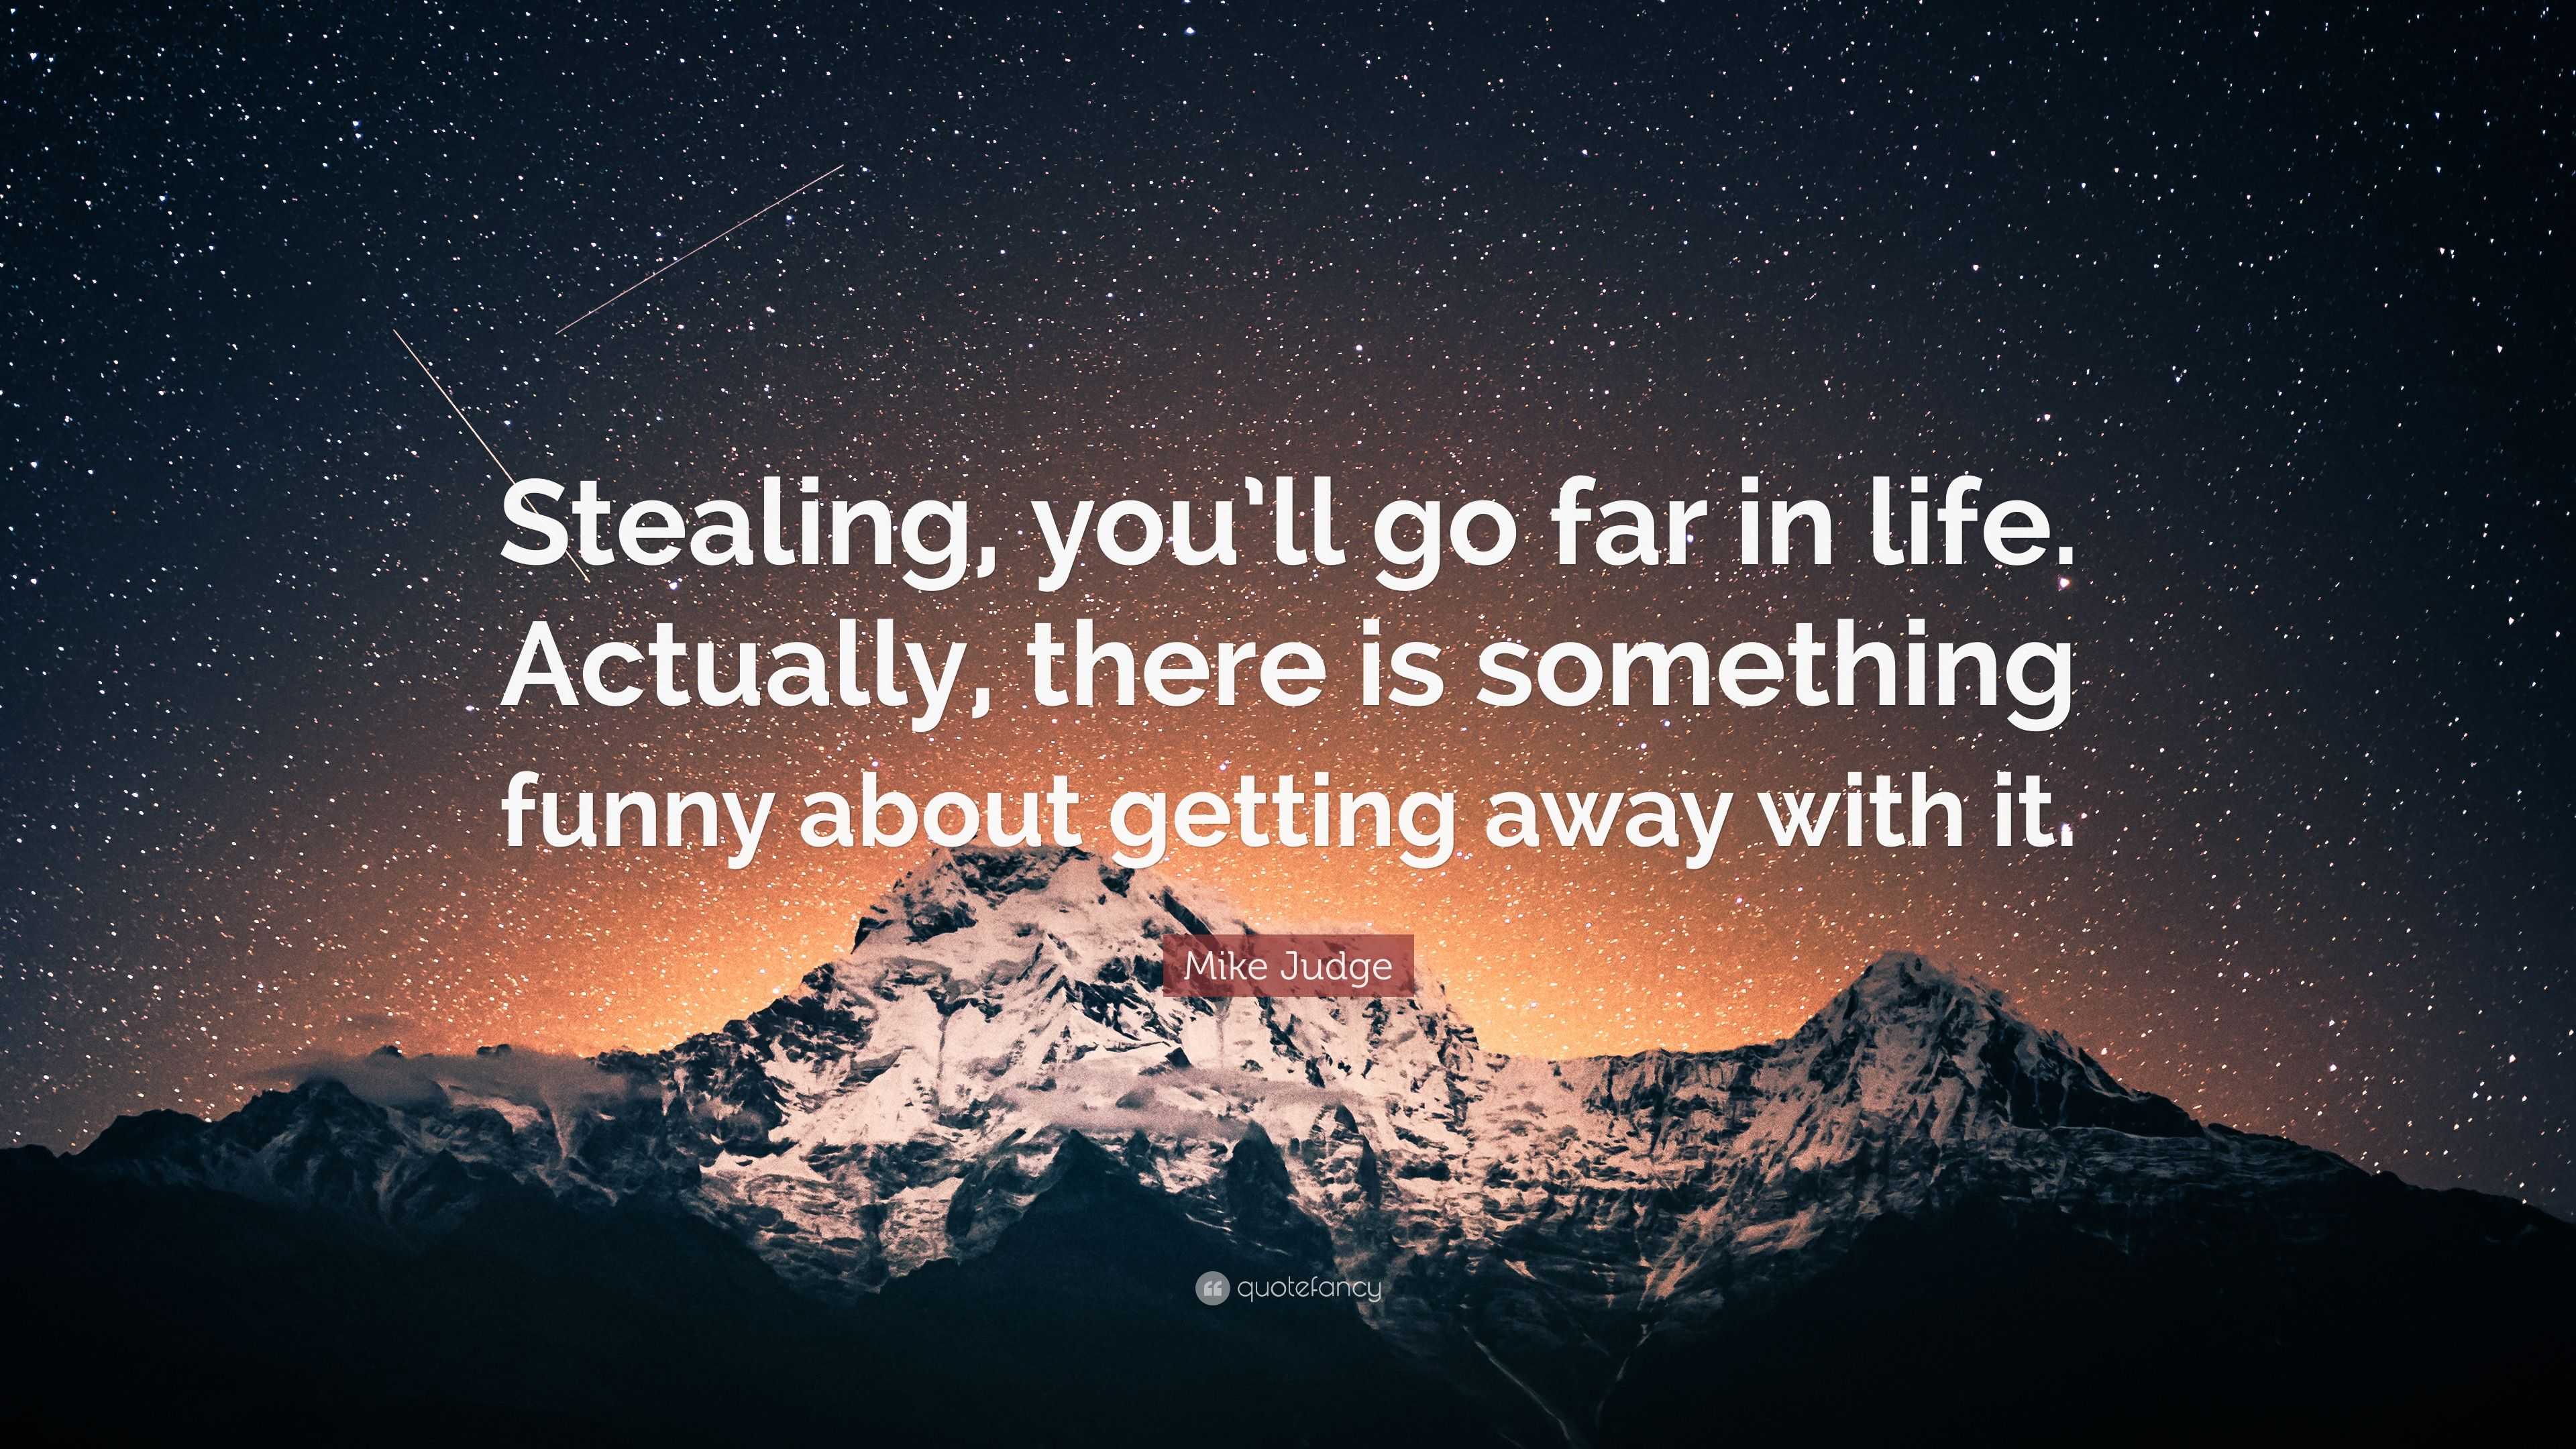 Mike Judge Quote: “Stealing, you'll go far in life. Actually, there is  something funny about